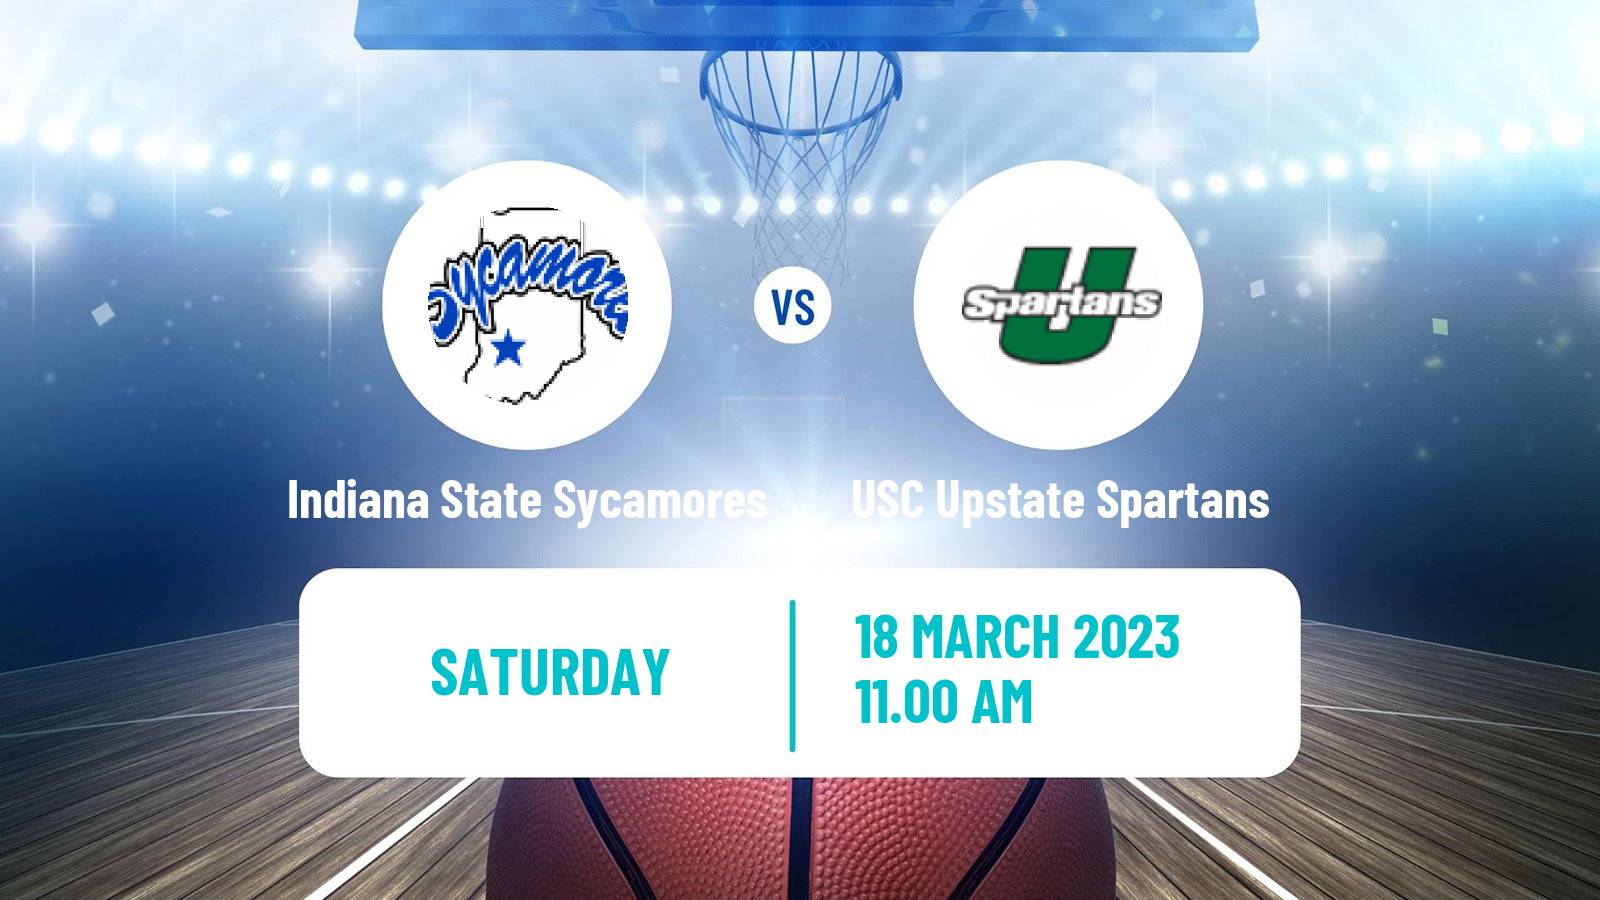 Basketball CBI Indiana State Sycamores - USC Upstate Spartans